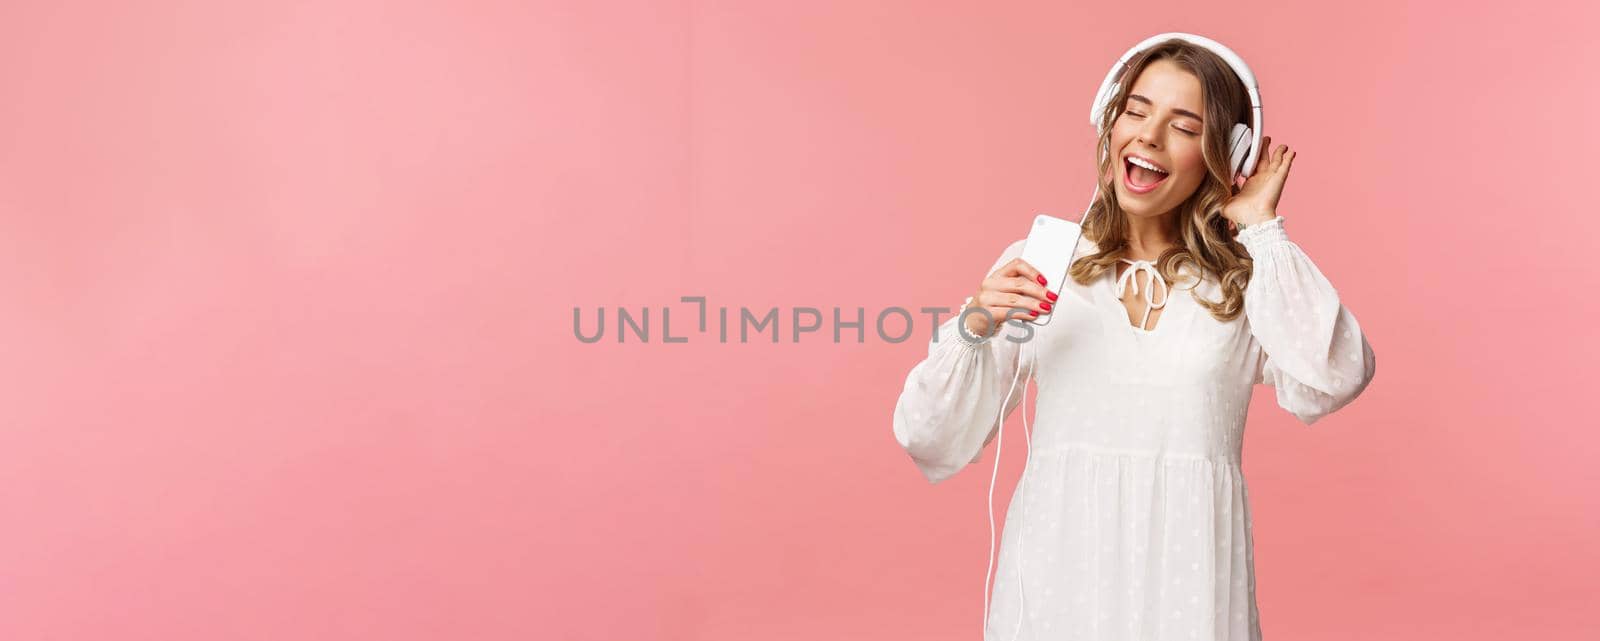 Portrait of beautiful blond caucasian female in white dress, listening music in headphones, close eyes and smiling, using mobile phone like microphone, singing along favorite song, pink background.